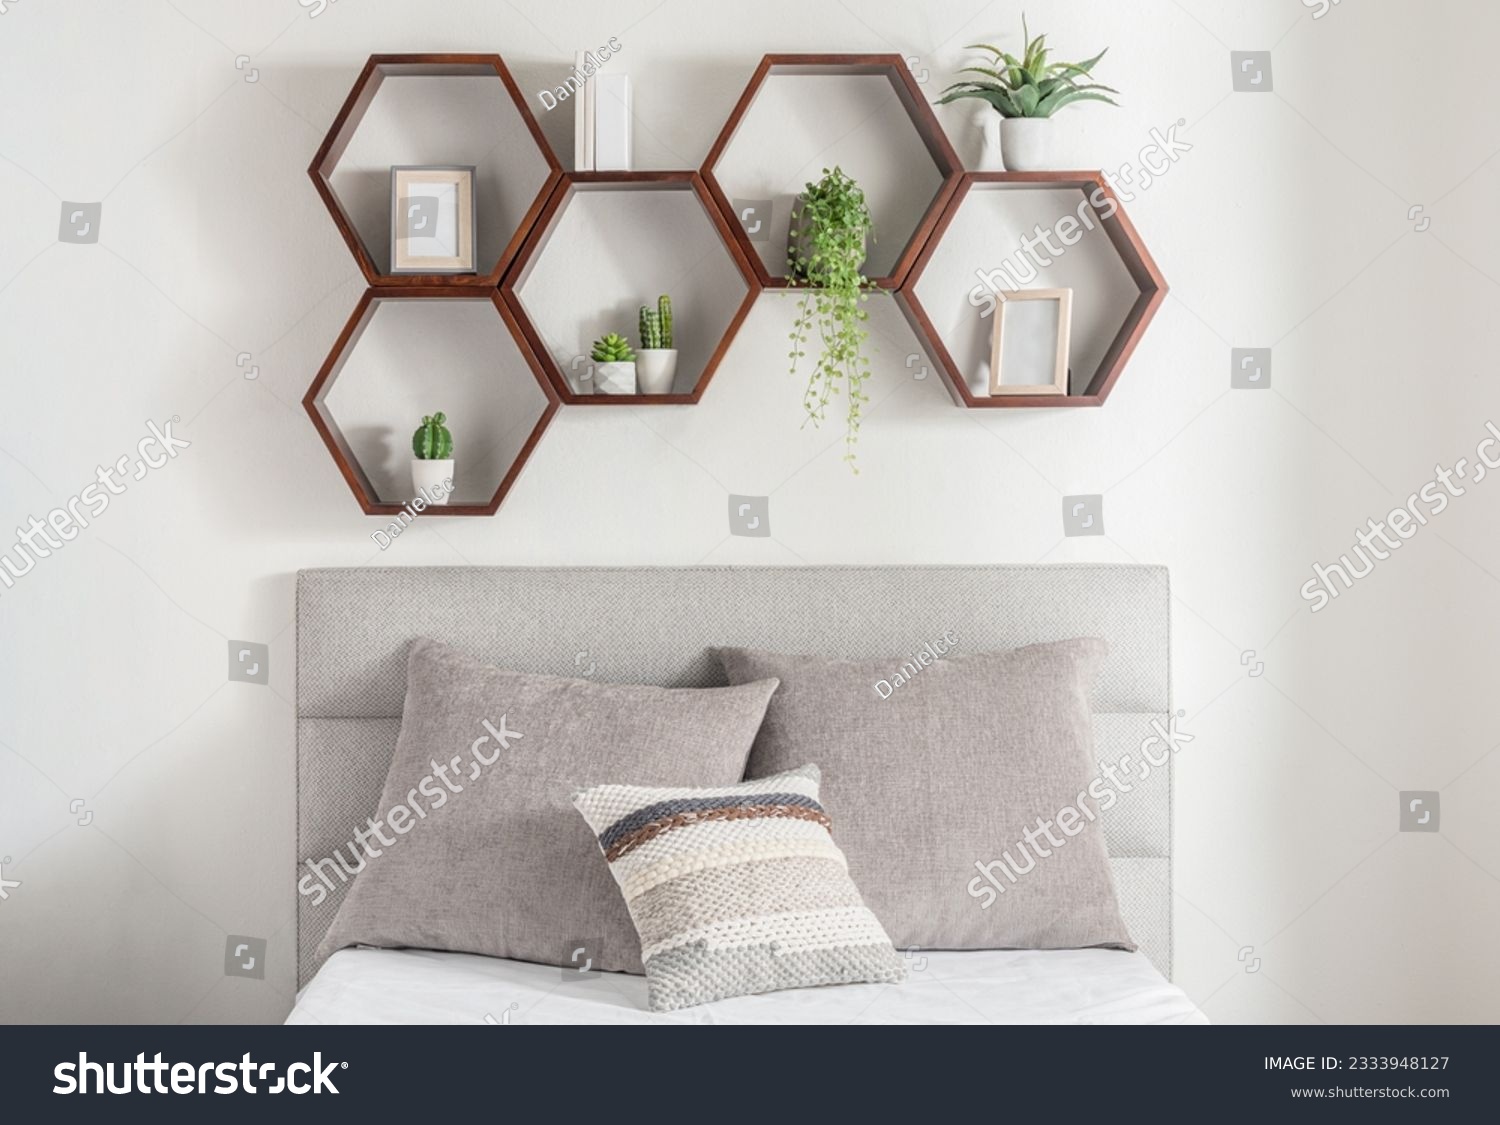 An inviting bedroom features suspended hexagonal wooden shelves above the bed, accented by plants for a tranquil feel #2333948127